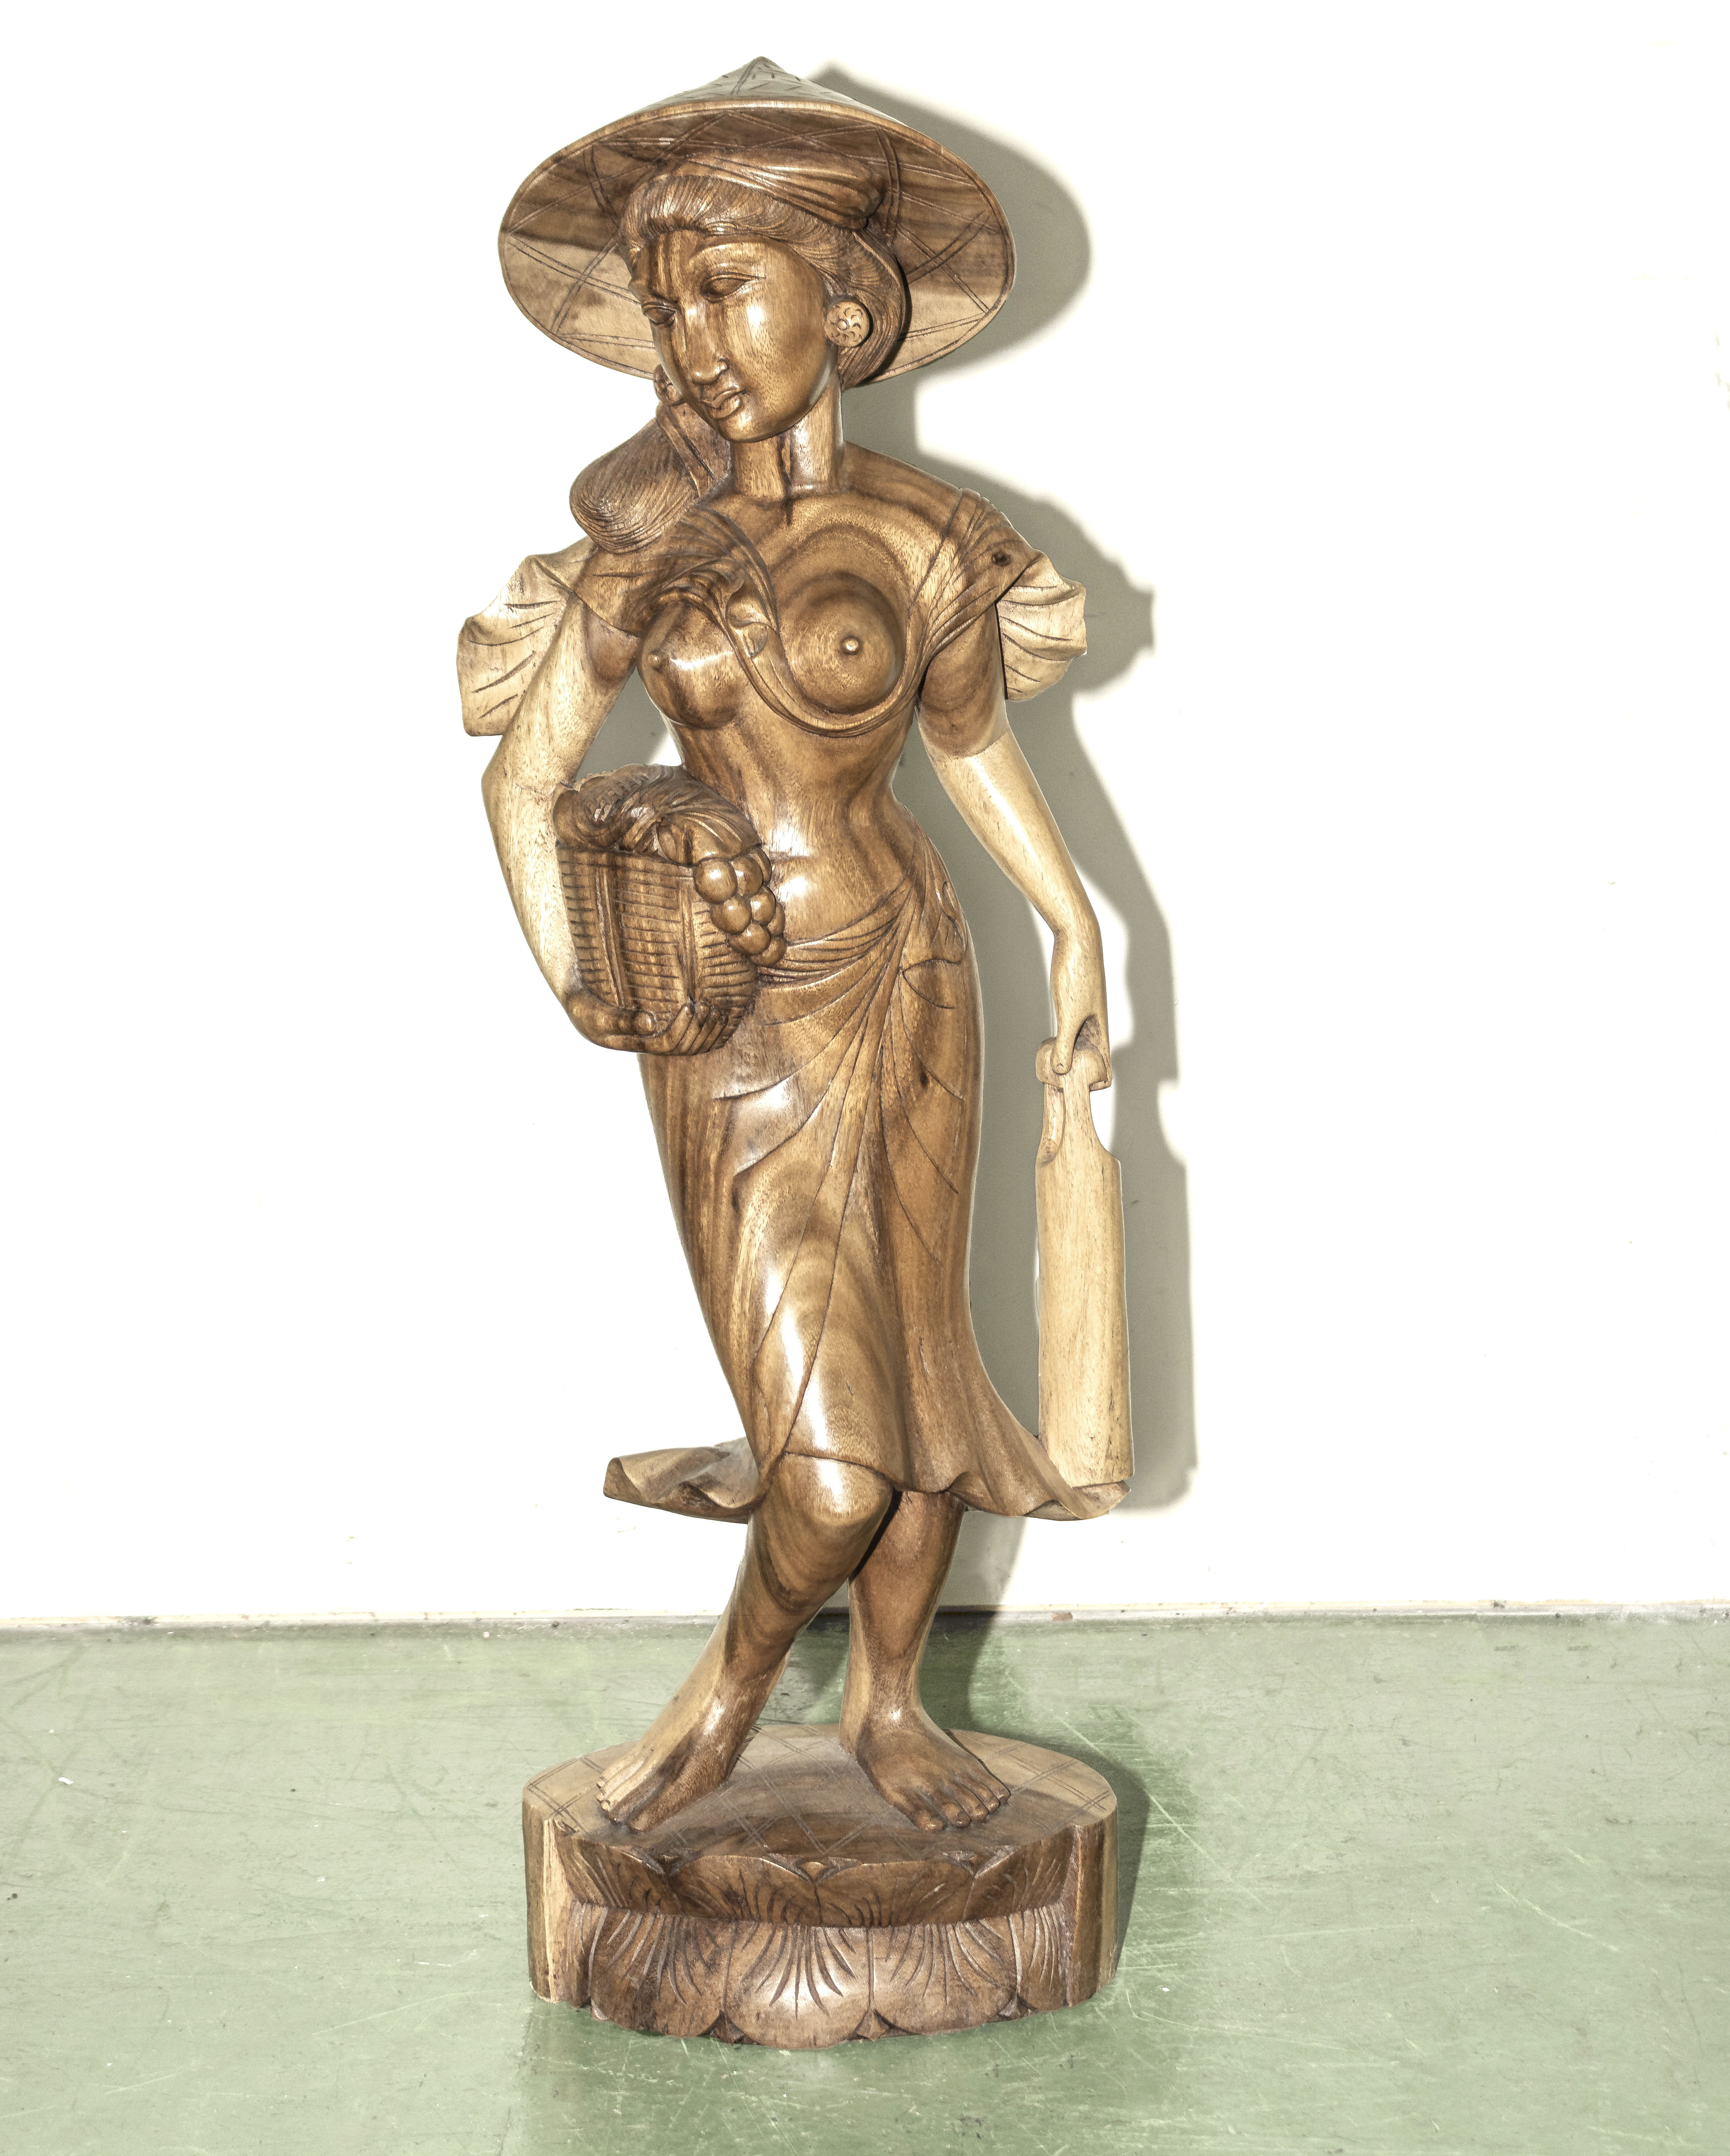 A carved wood Balinese figure of a lady 40" tall